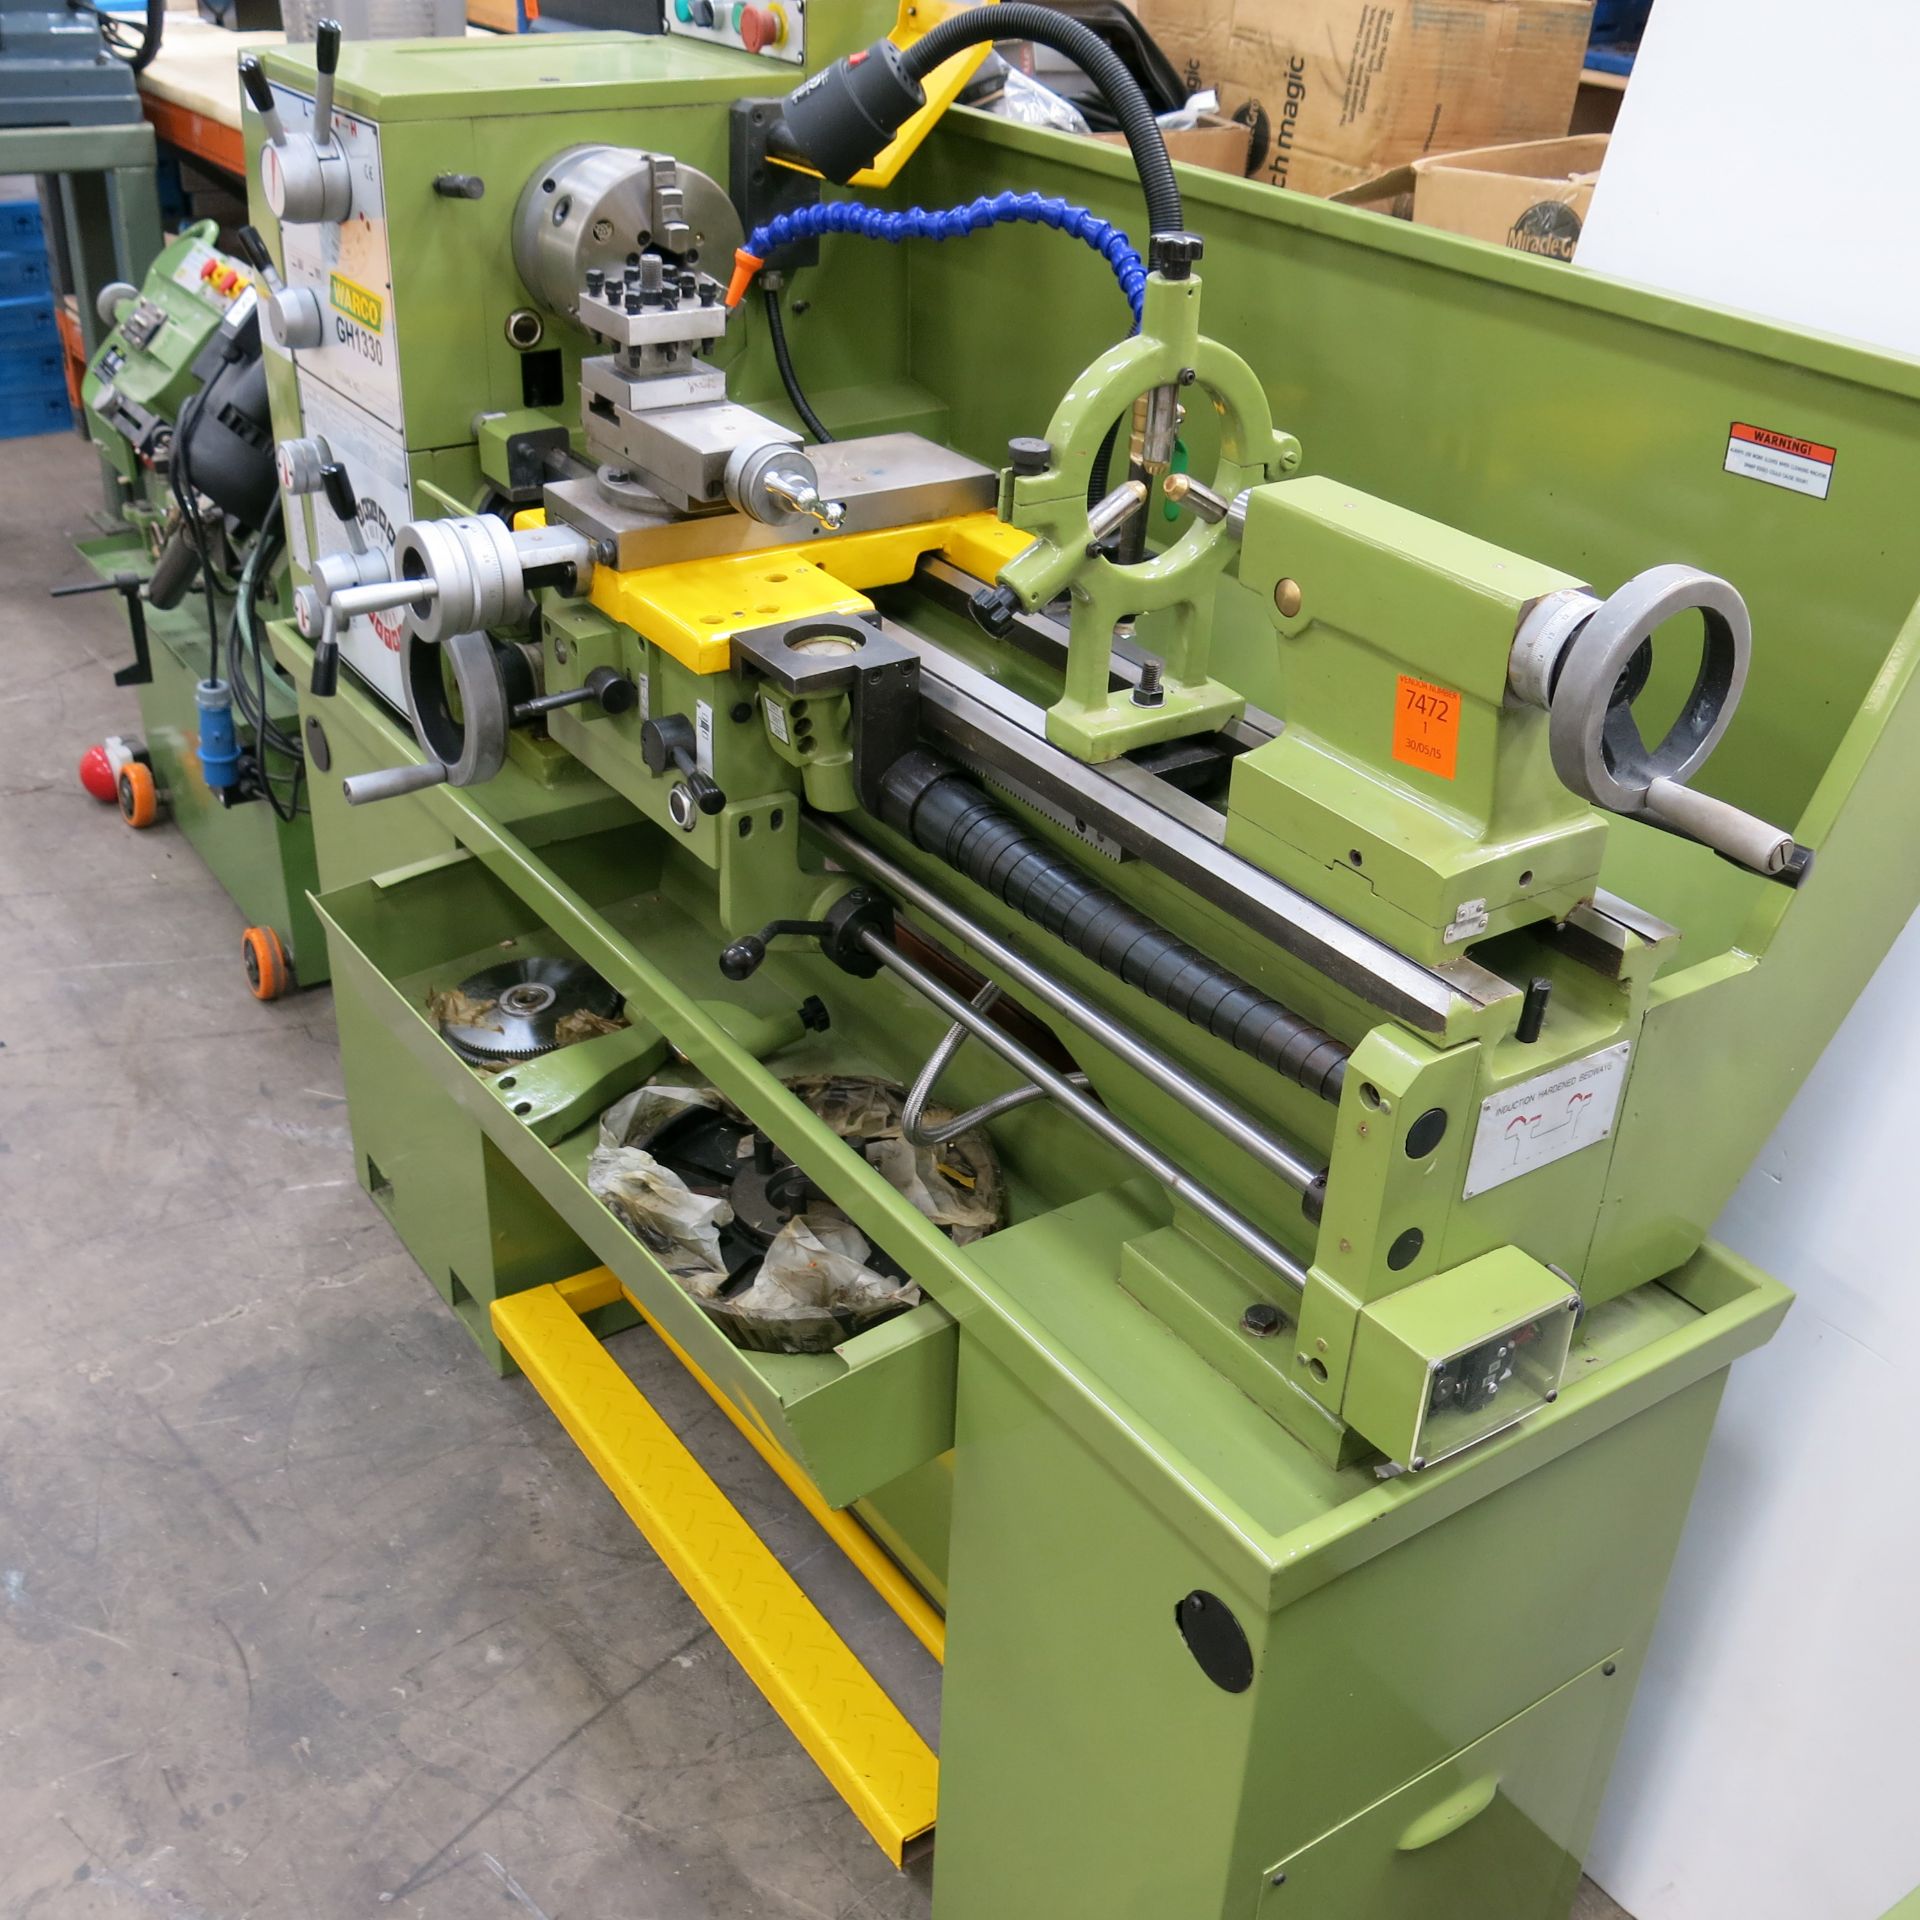 * A Warco GH1330 440V 3 Phase Lathe, (Current Model) SN 1051353 c/w extra gears. Please note, - Image 6 of 6